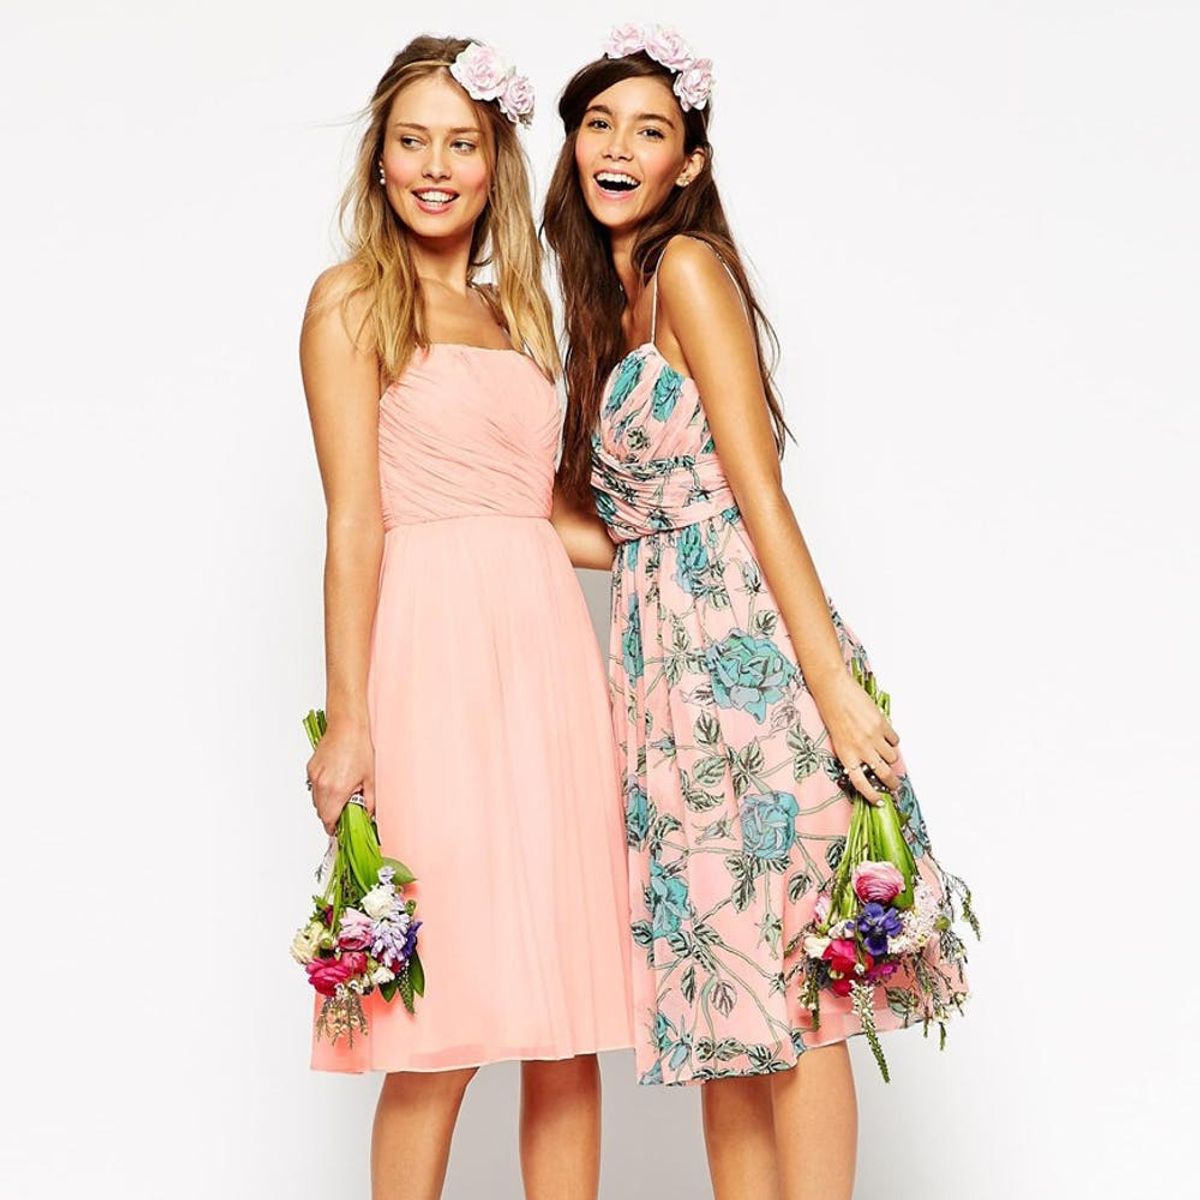 ASOS Has a New Bridesmaids Line and It’s Everything